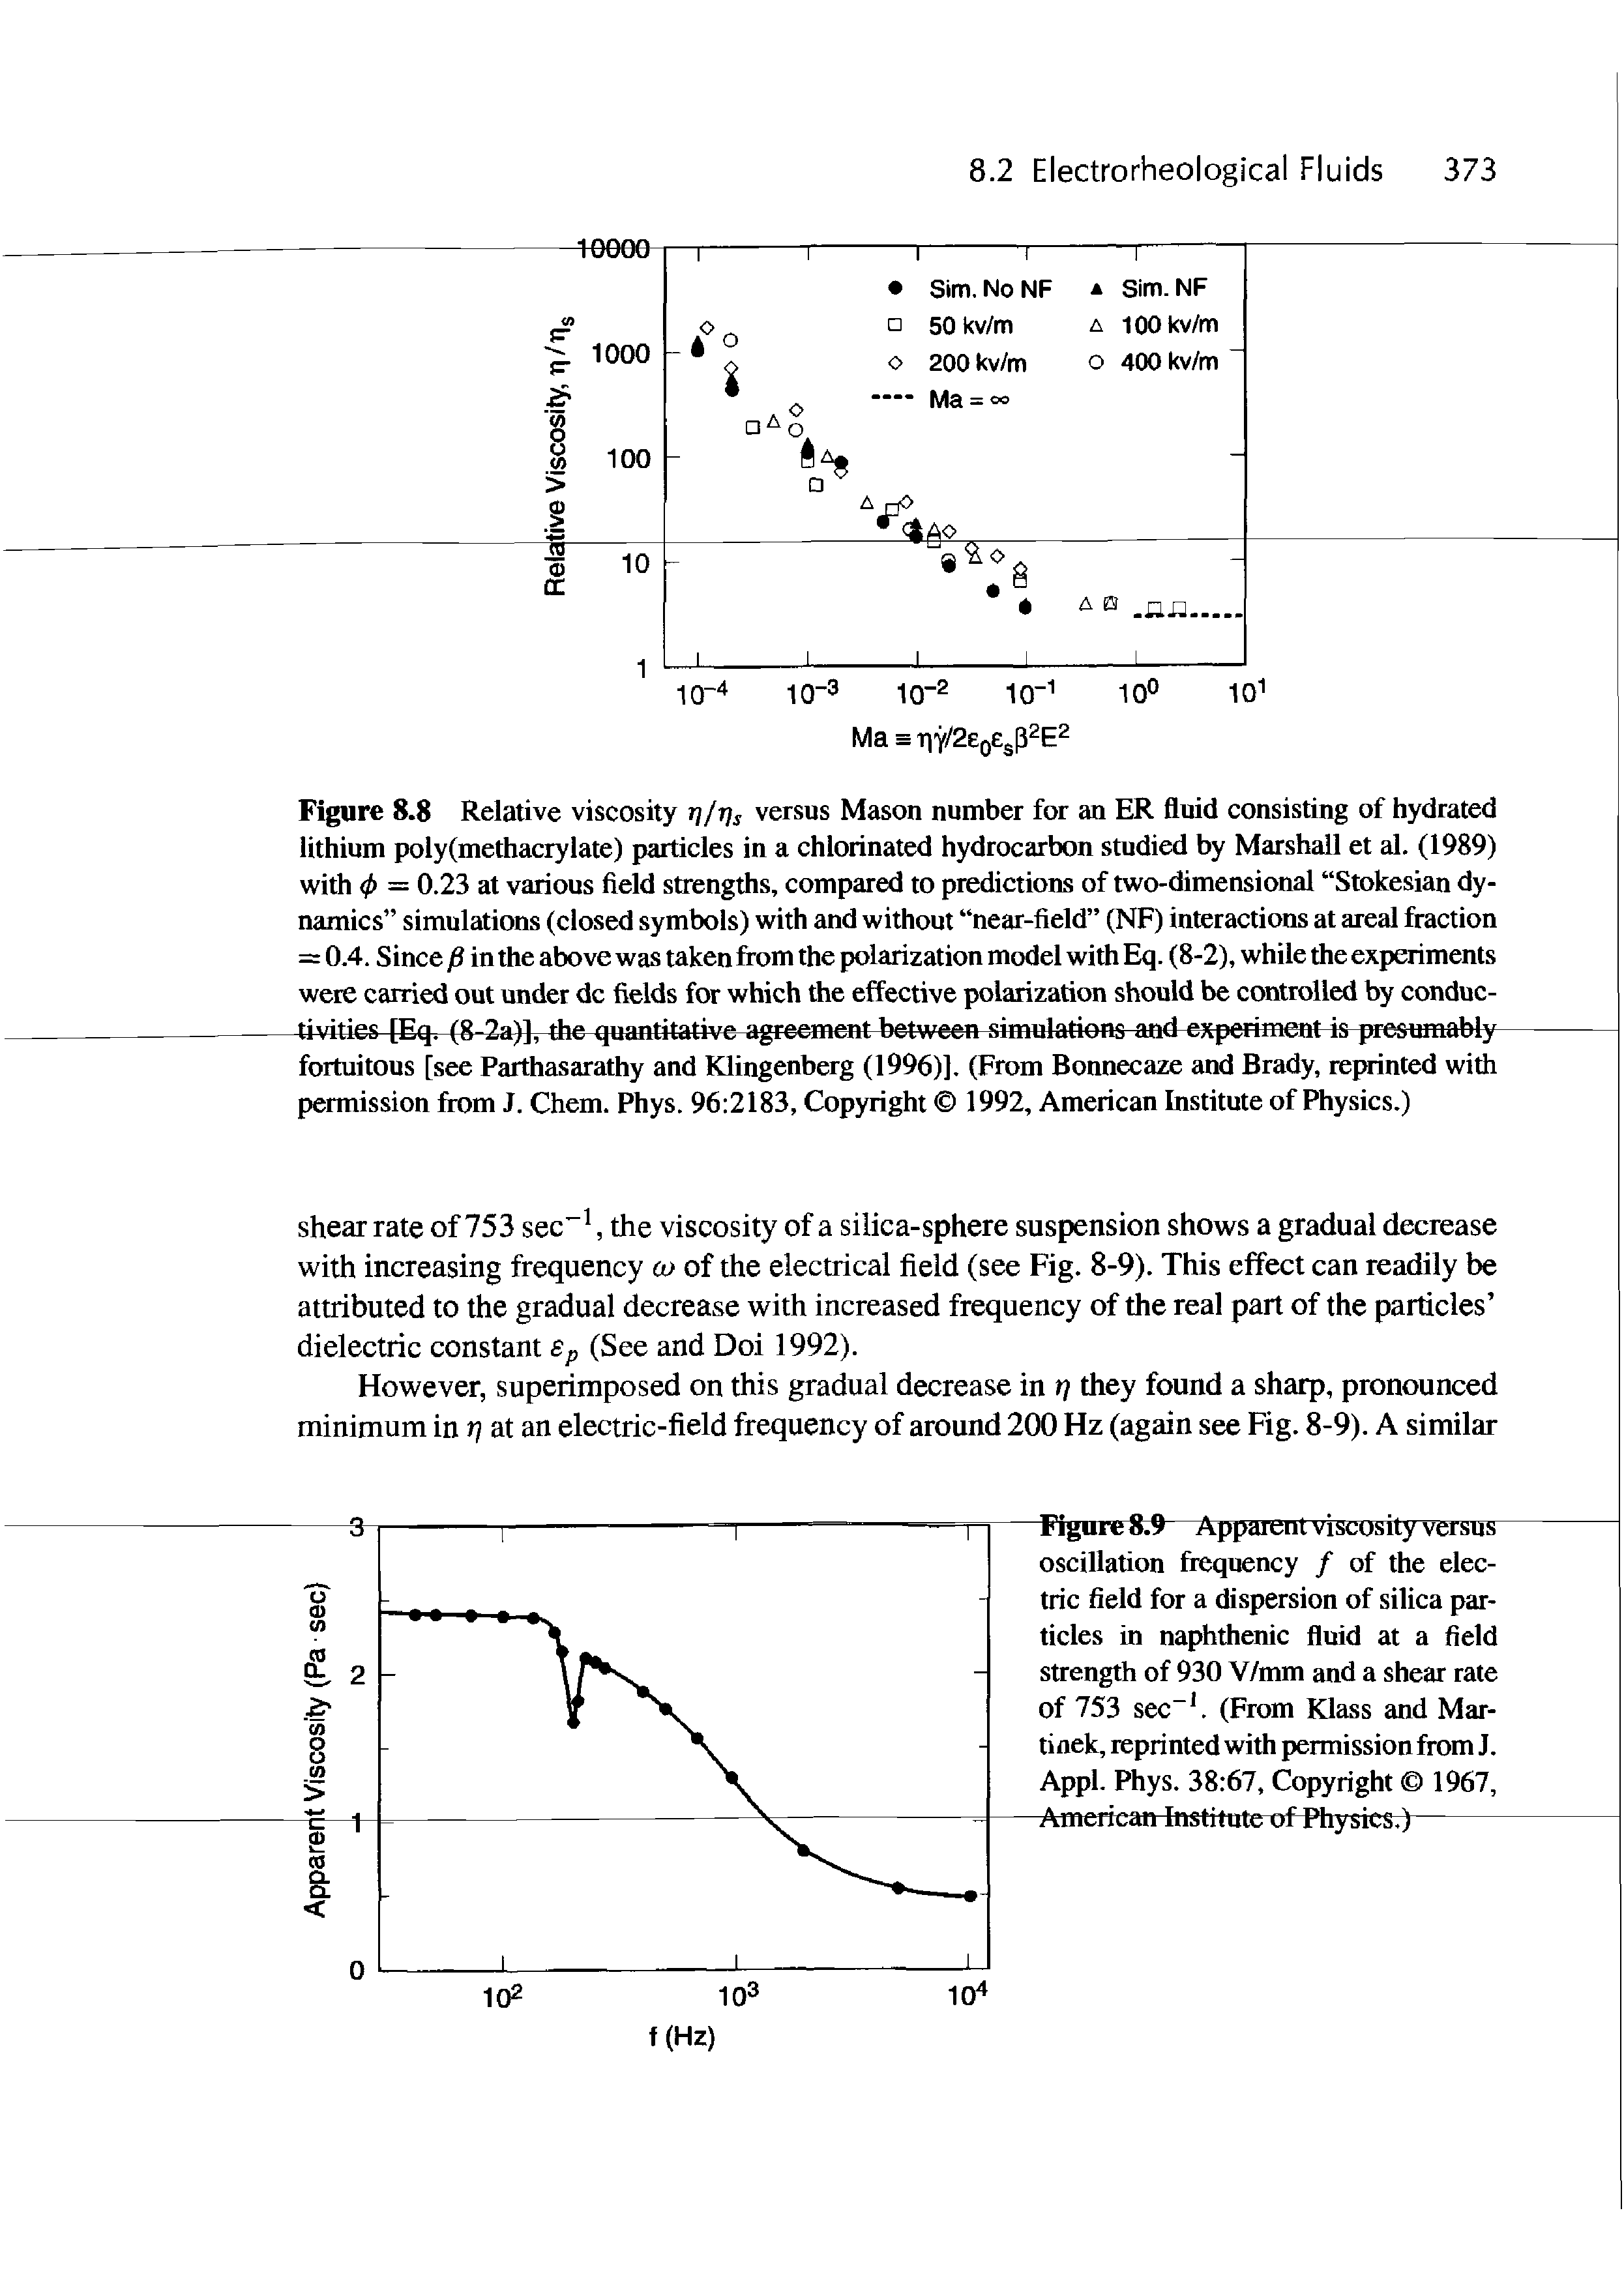 Figure 8.8 Relative viscosity t]/t s versus Mason number for an ER fluid consisting of hydrated lithium poly(methacrylate) particles in a chlorinated hydrocarbon studied by Marshall et al. (1989) with <f> = 0.23 at various field strengths, compared to predictions of two-dimensional Stokesian dynamics simulations (closed symbols) with and without near-field (NF) interactions at areal fraction = 0.4. Since p in the above was taken from the polarization model with Eq. (8-2), while the experiments were carried out under dc fields for which the effective polarization should be controlled by conduc-tivities [Eq. (8-2a)], the quantitative agreement between simulations and experiment is presumably...